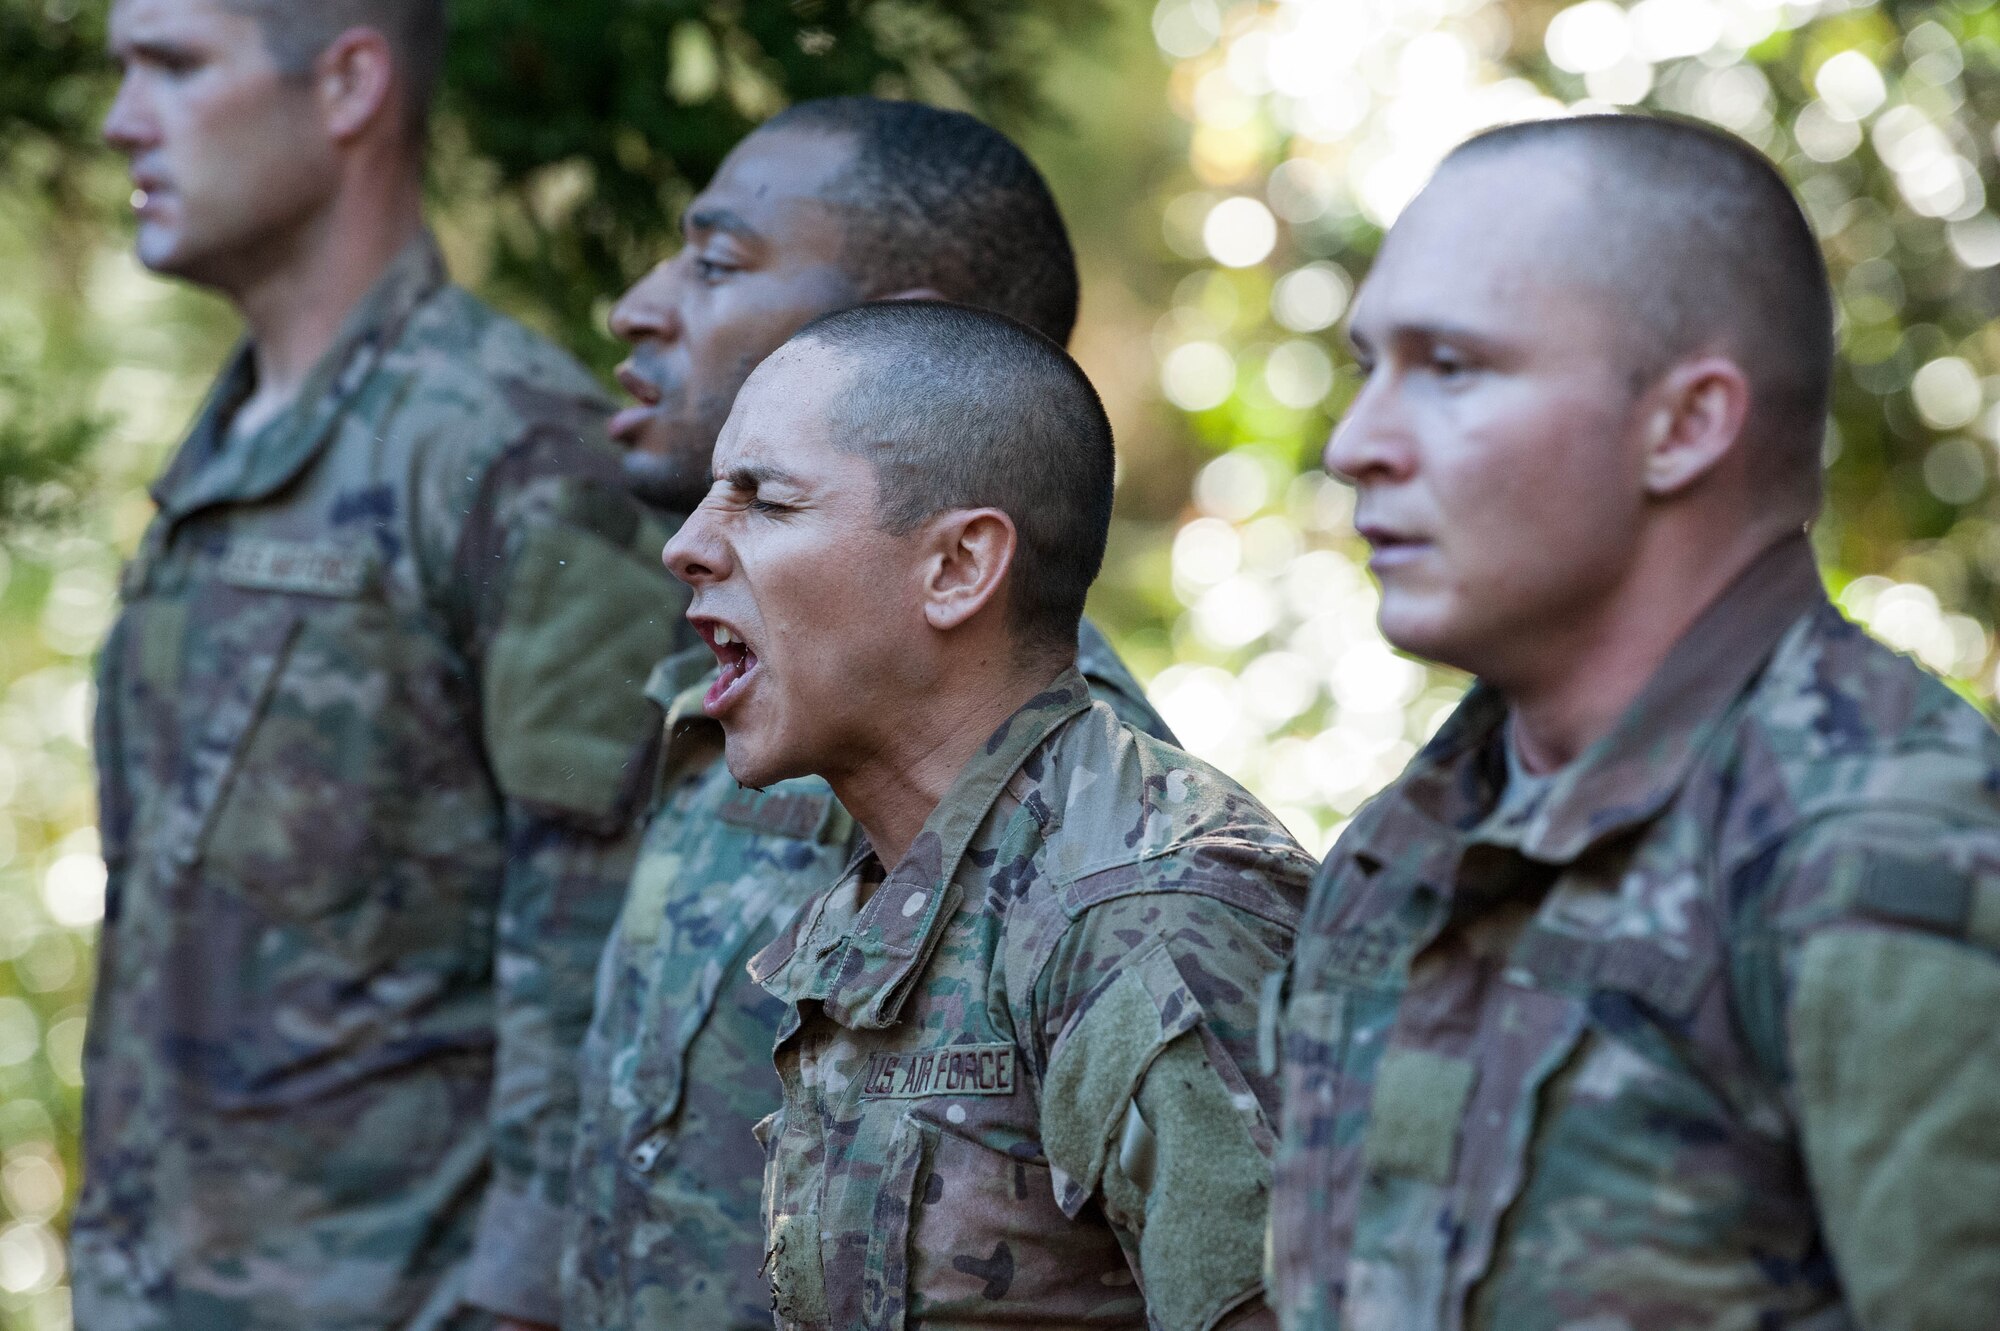 Tech. Sgt. Christian Varela, Ranger Assessment Course student, recites the third stanza of the Ranger Creed before they begin an obstacle course at a training camp near Schofield Barracks, Oahu, Hawaii, May 20, 2019. Twenty-three Airmen from across the Air Force recently converged on a training camp for a three-week Ranger Assessment Course near Schofield Barracks, May 12-31, 2019. The Airmen who pass the RAC gain more than a ticket into Ranger School and knowledge on Army tactics – they learn to lead. (U.S. Air Force photo by Staff Sgt. Hailey Haux)